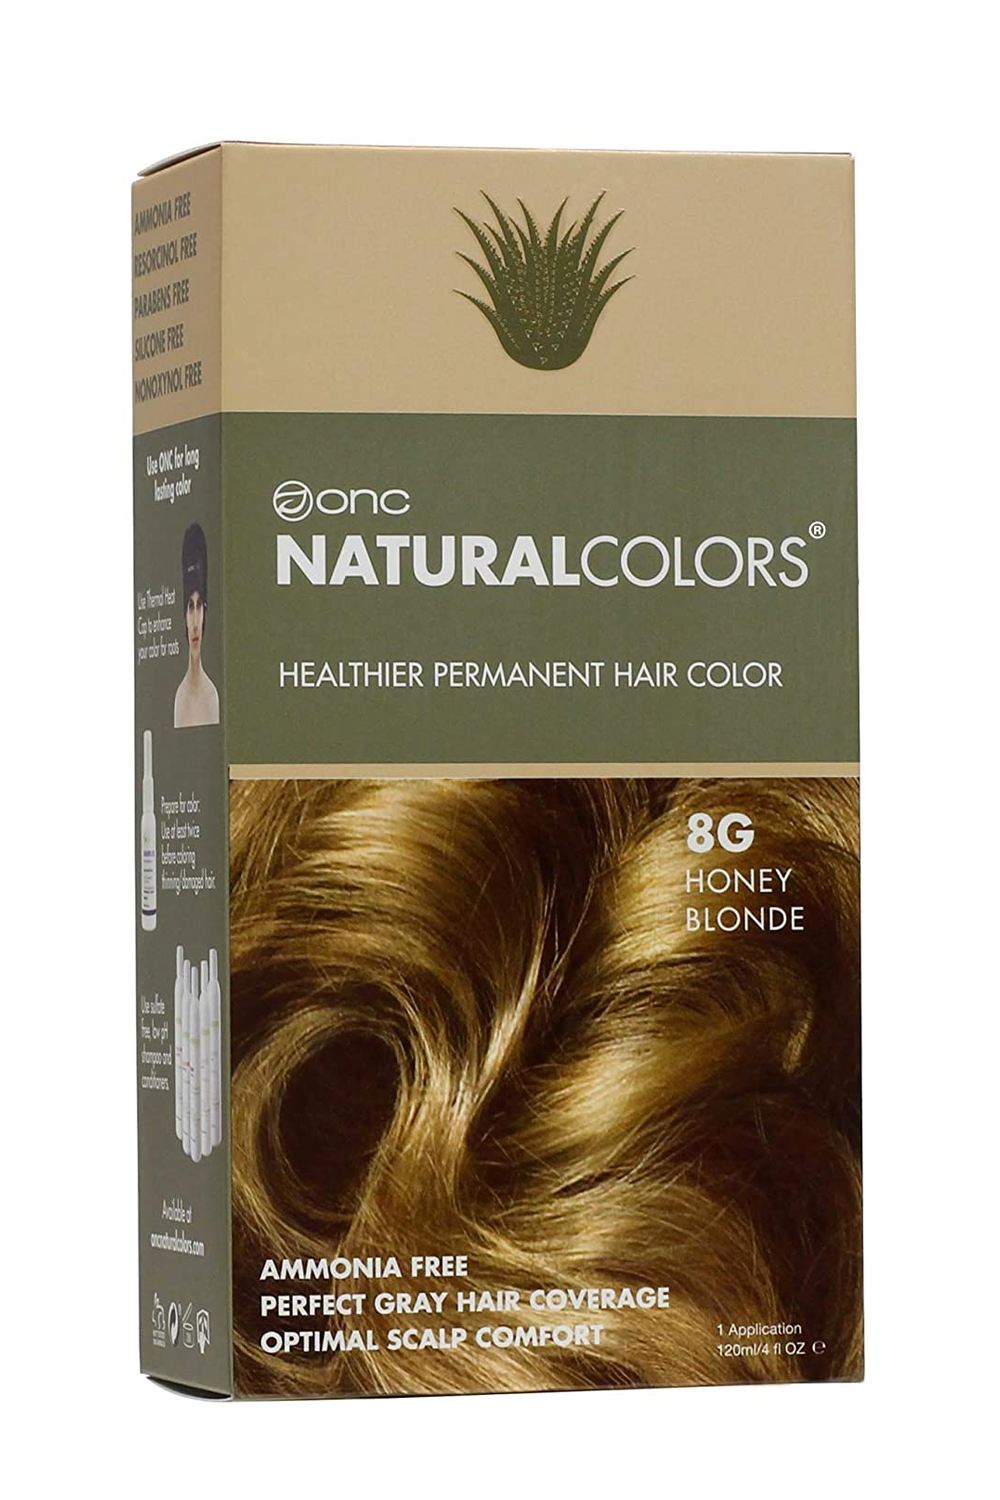 15 Best Natural and Non-Toxic Hair Dyes of 2023